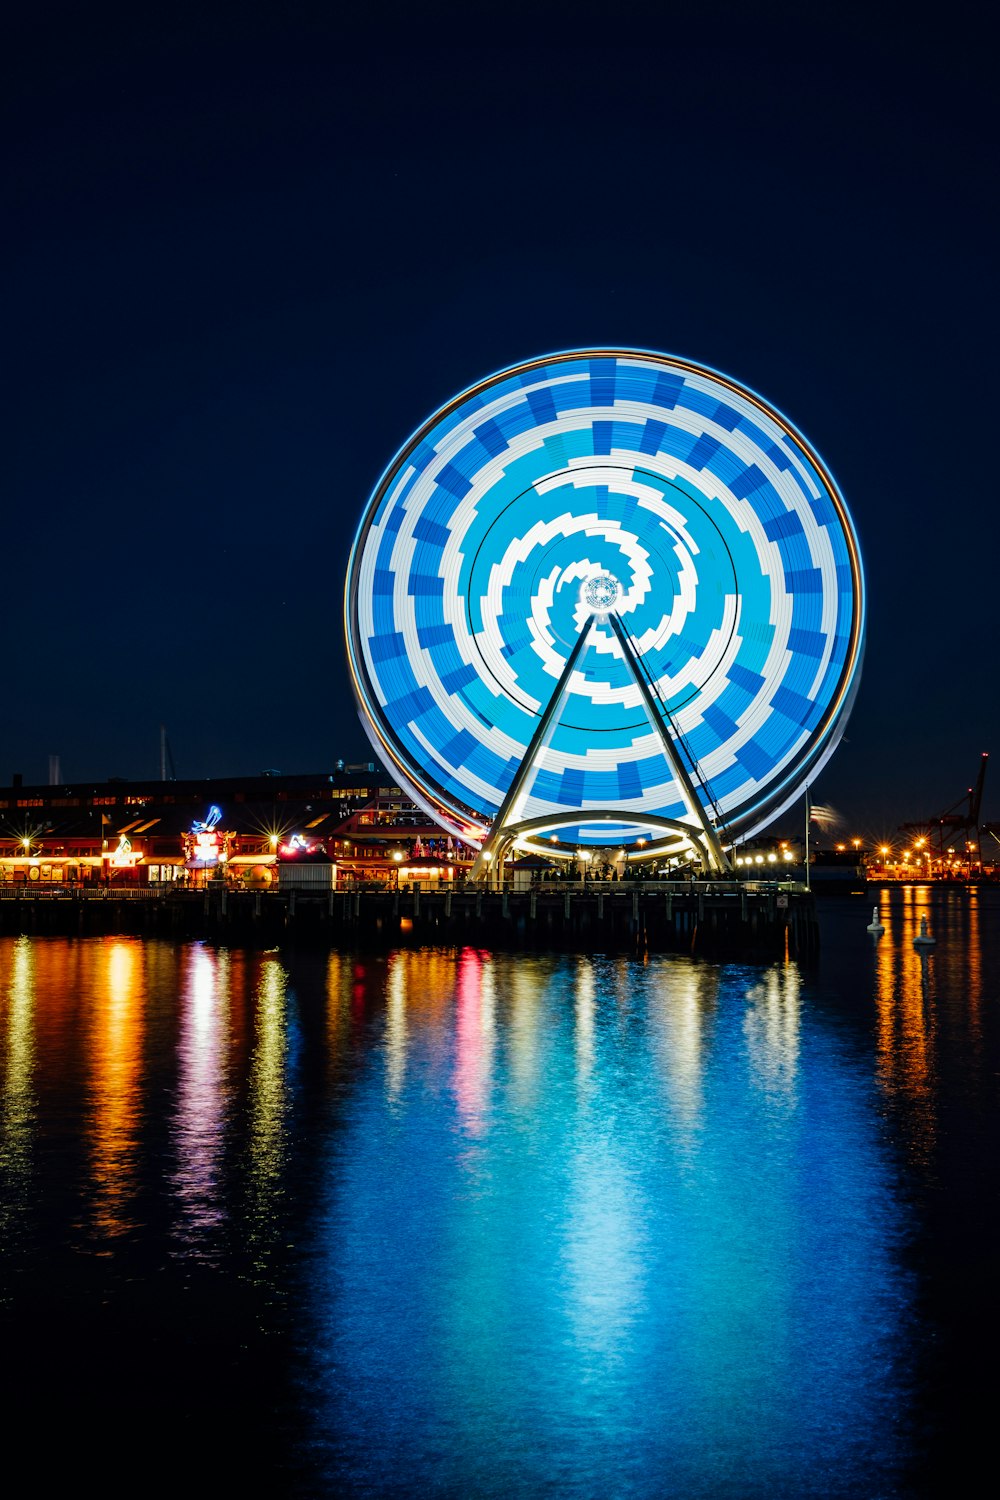 Ferris Wheel with blue LED light reflecting on body of water during night